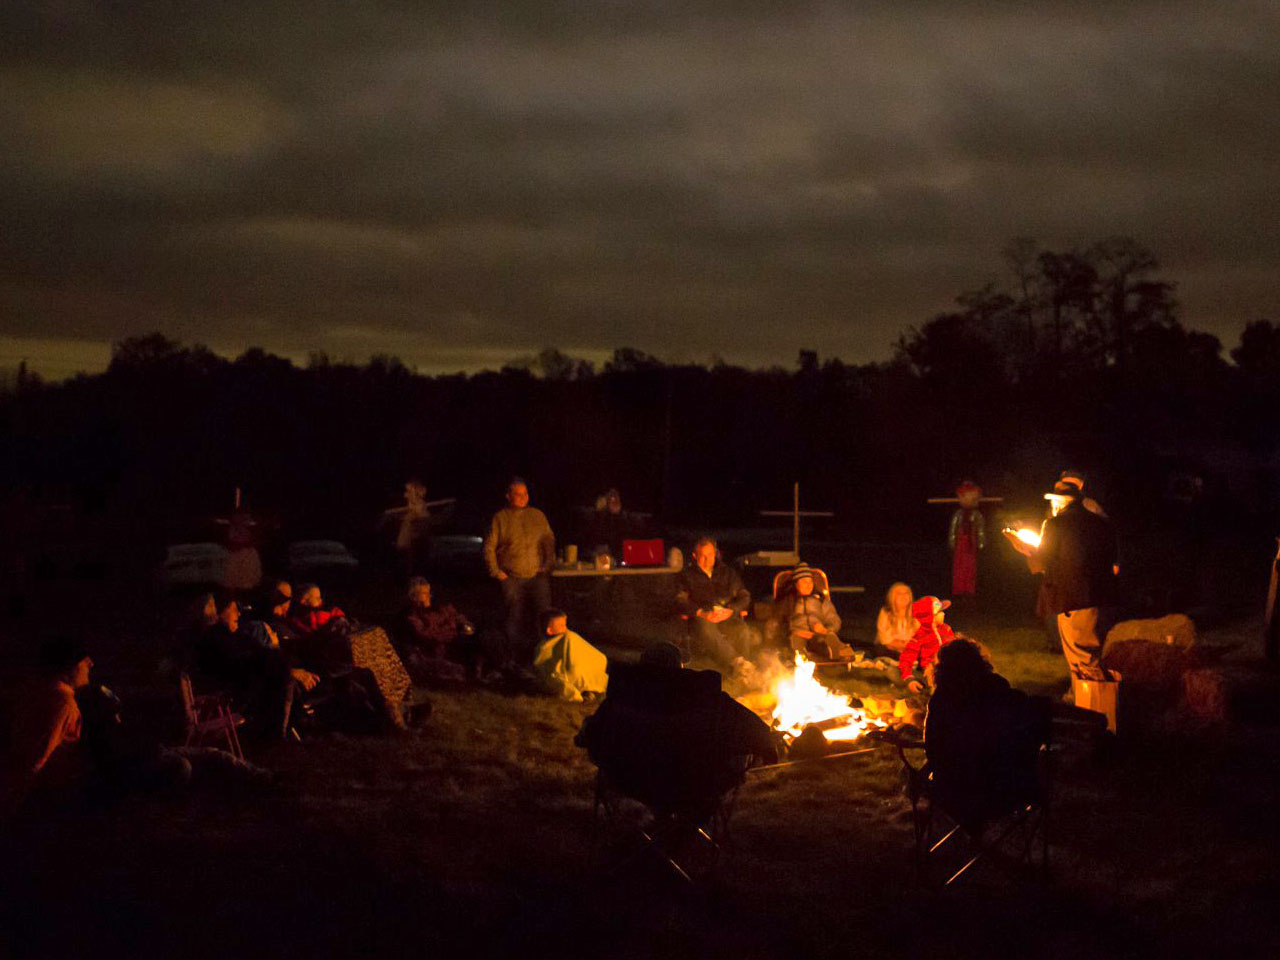 Scary story night by campfire for kids of all ages